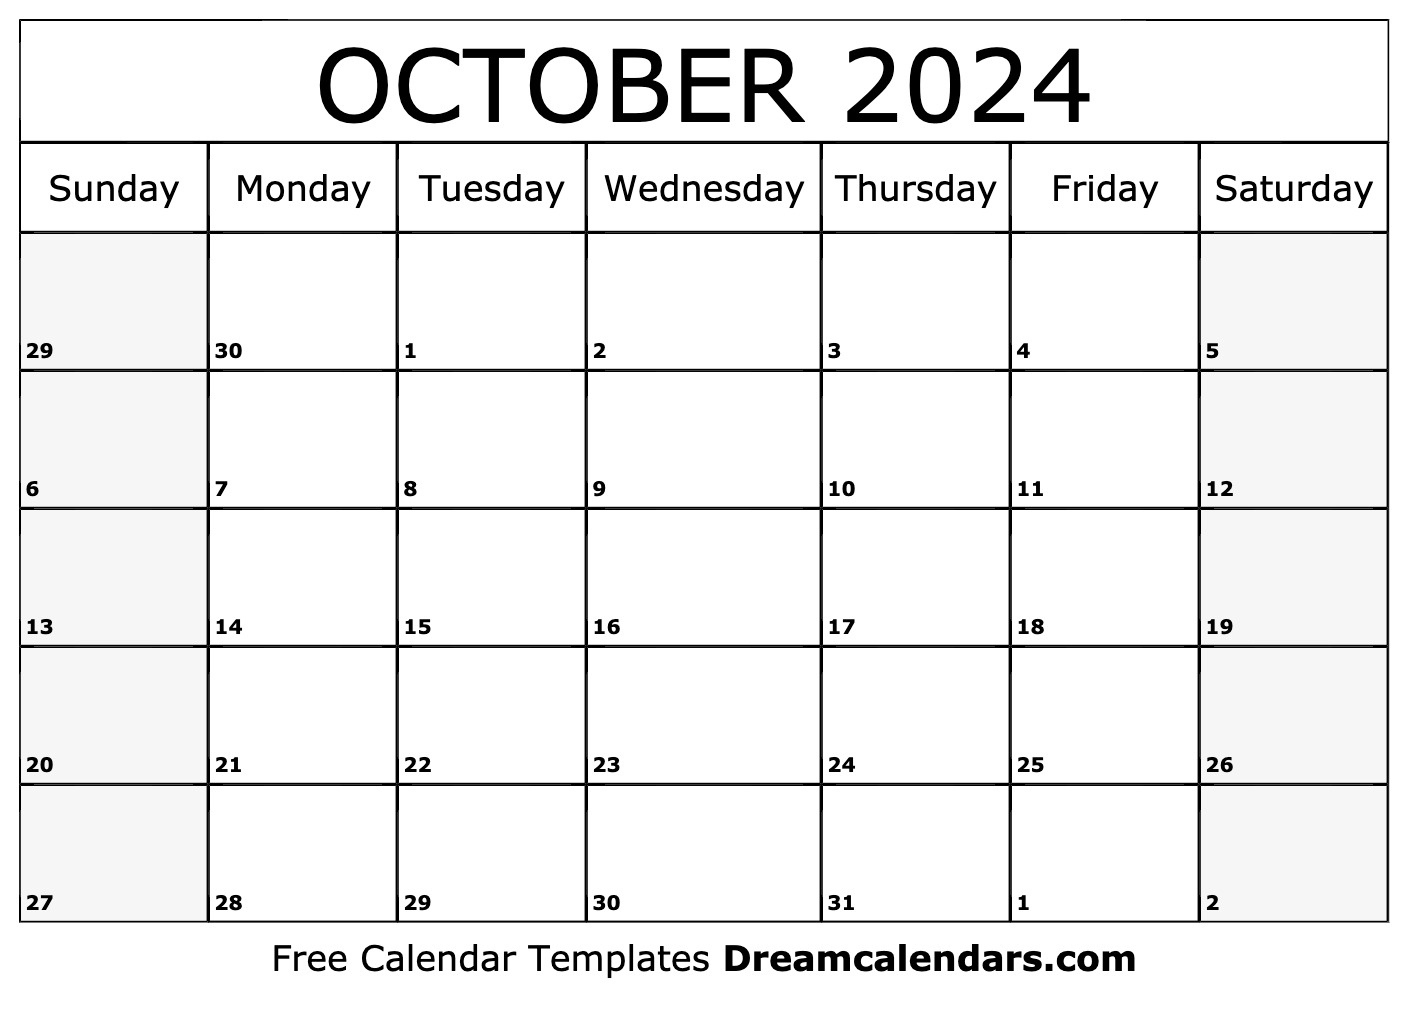 October 2024 Calendar | Free Blank Printable With Holidays | Printable Calendar 2024 October